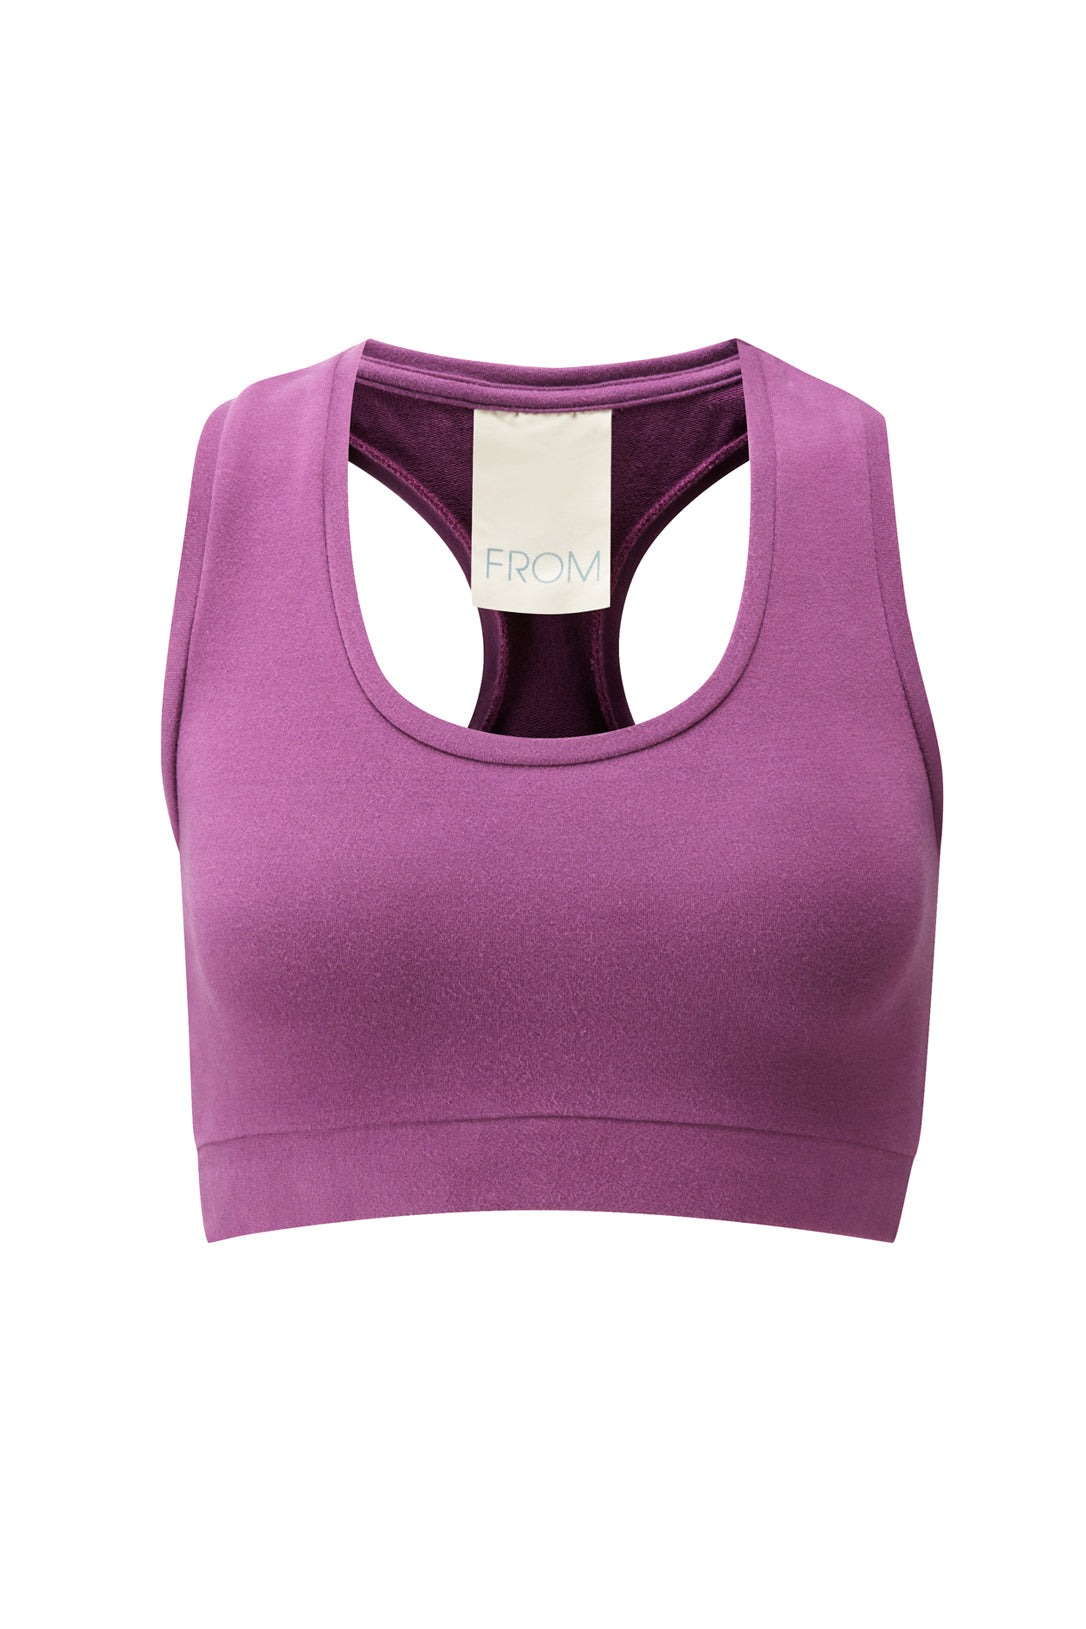 Organic Cotton Yoga Bras - Toxin Free - Best For Your Breasts